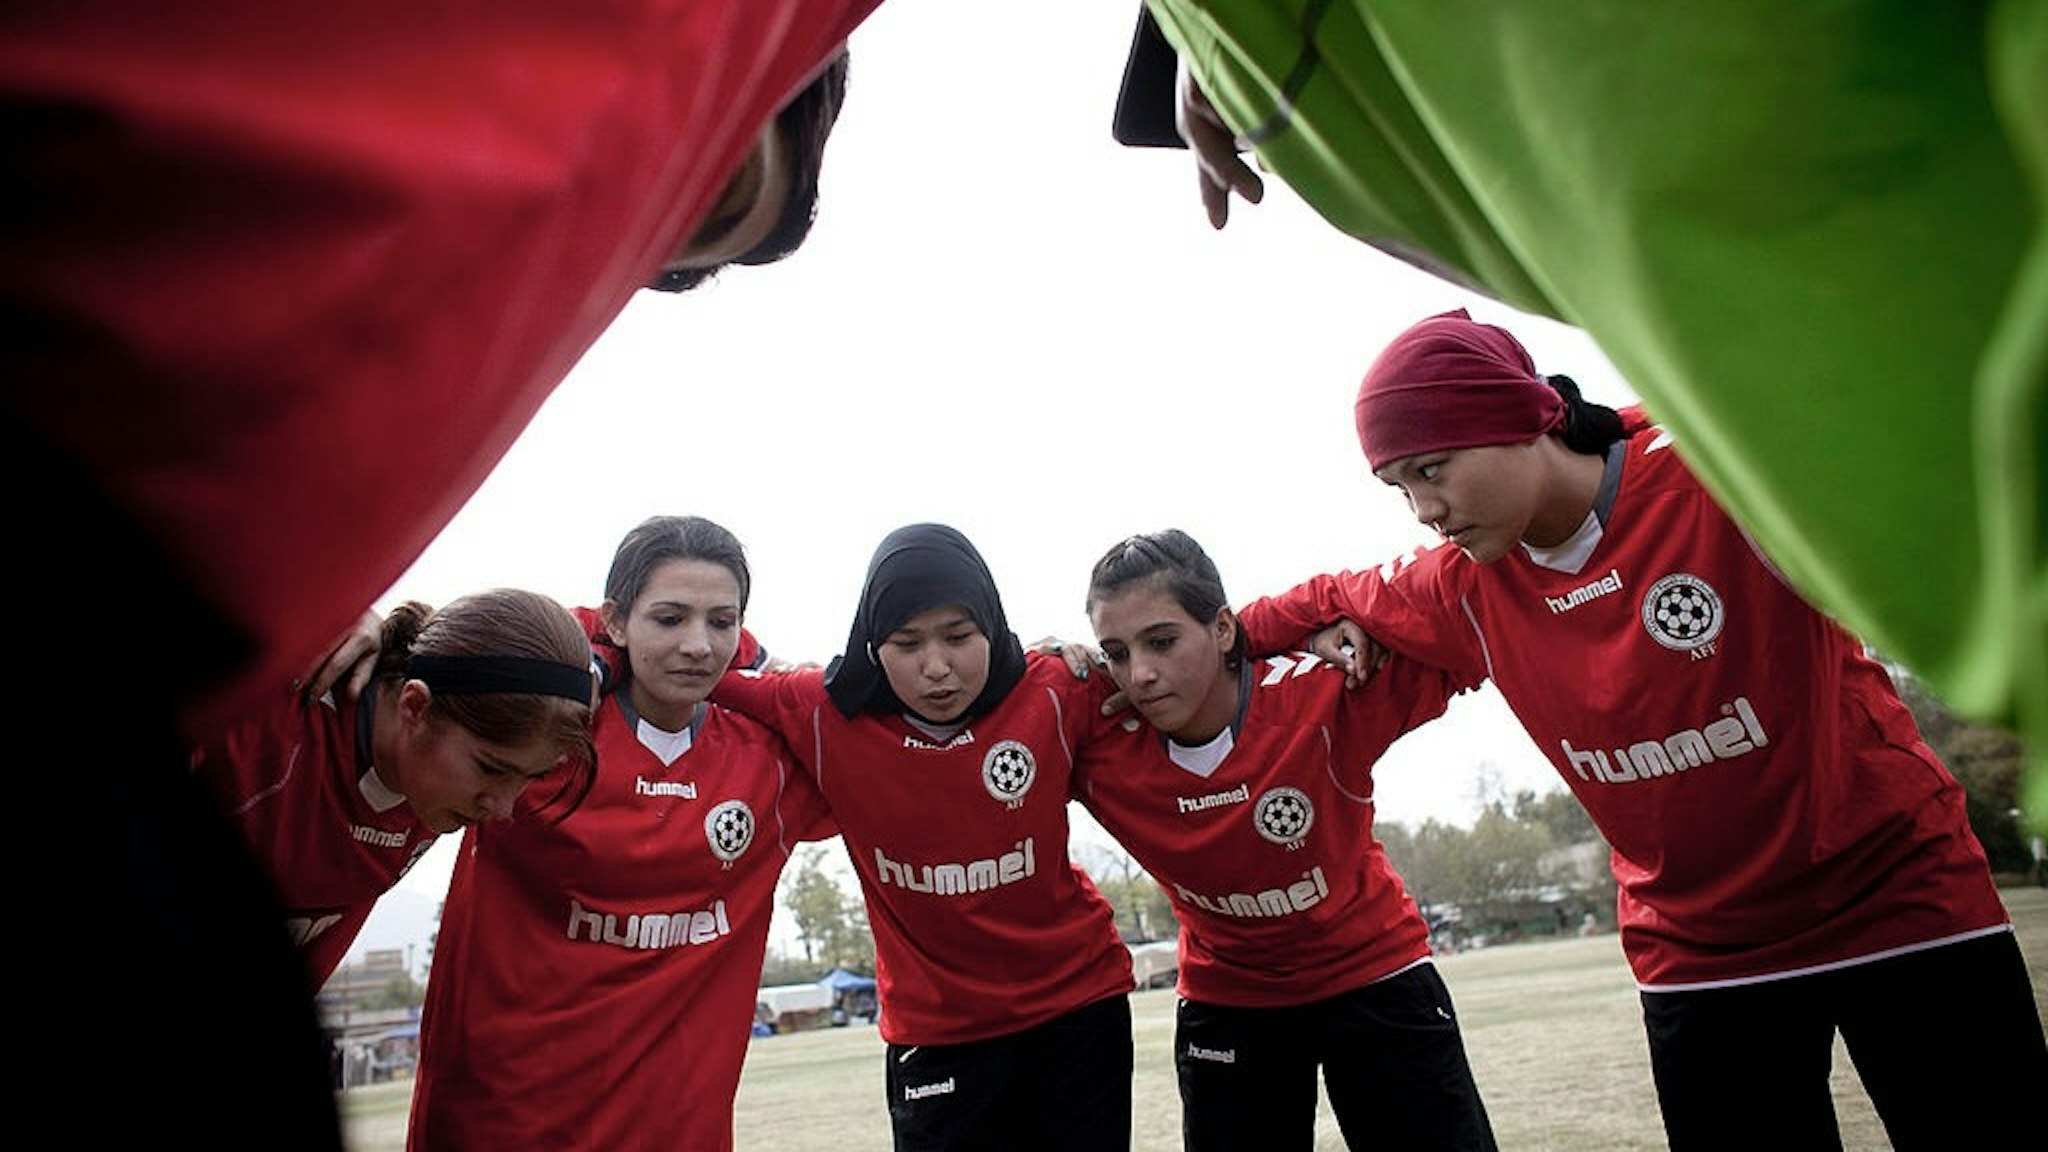 Afghan Women's National Football Team Play A Match Against The ISAF AFGHANISTAN, KABUL - OCTOBER 29: Members of the Afghan women's national football team huddles during a match with the NATO-led International Security Assistance Force (ISAF) women's team in a friendly football match at the ISAF headquarters in Kabul on October 29, 2010 in Kabul, Afghanistan. The Afghan women's team won 1-0. (Photo by Majid Saeedi/Getty Images) Majid Saeedi / Stringer via Getty Images